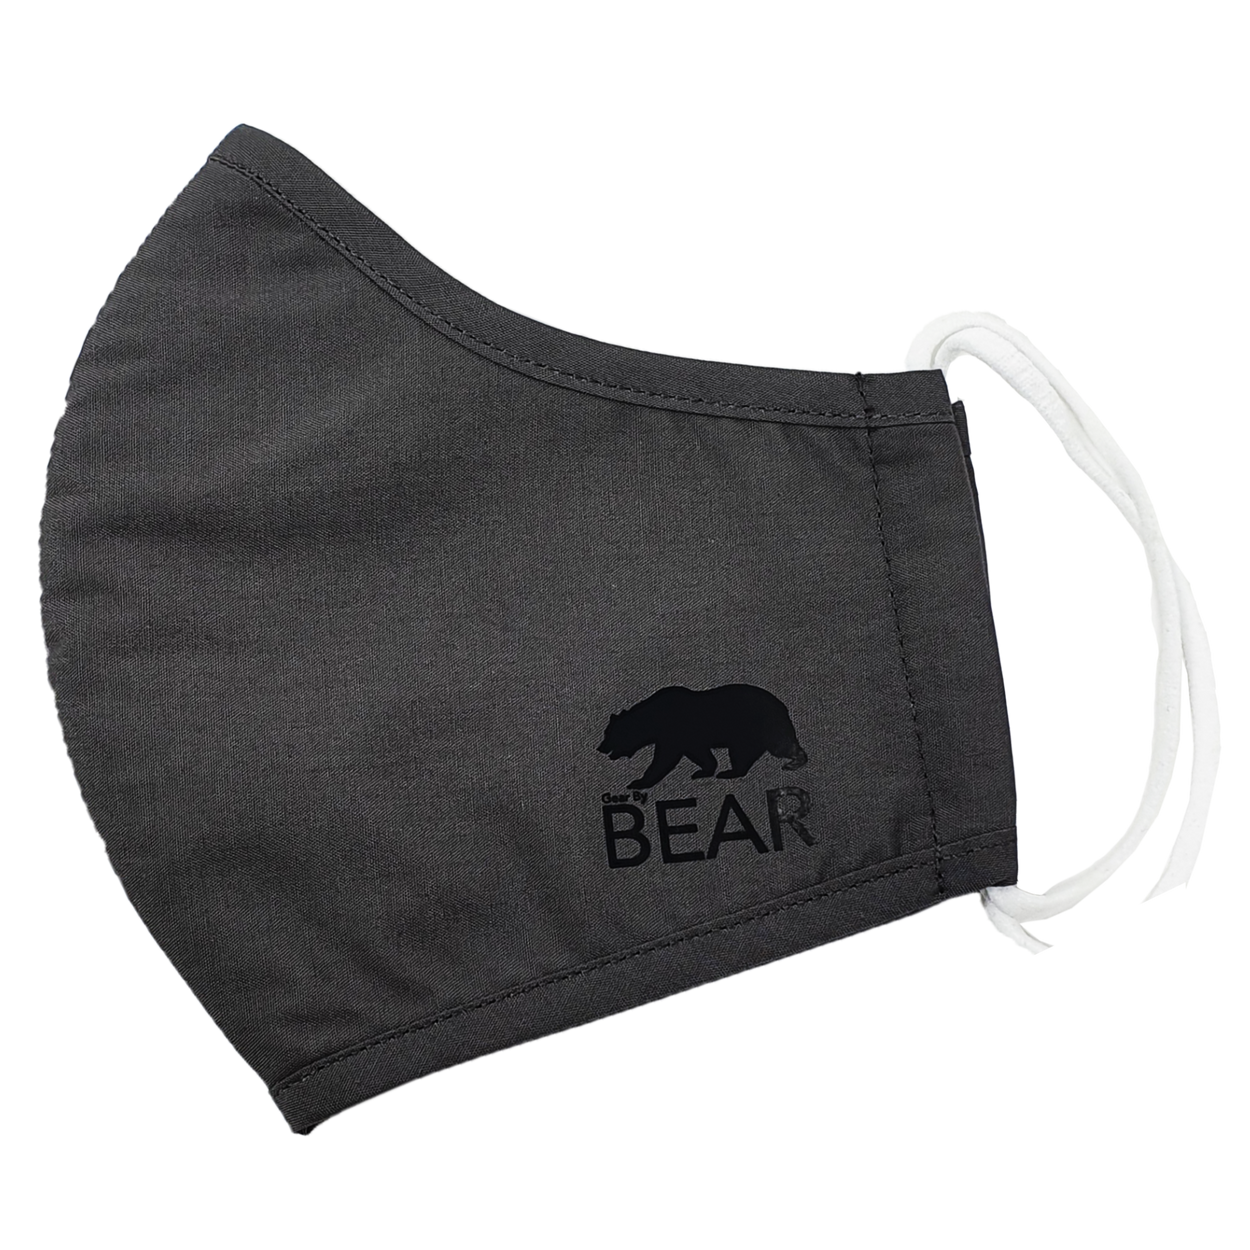 Reusable Face Mask, 3 Layer Cotton with Elastic Loop